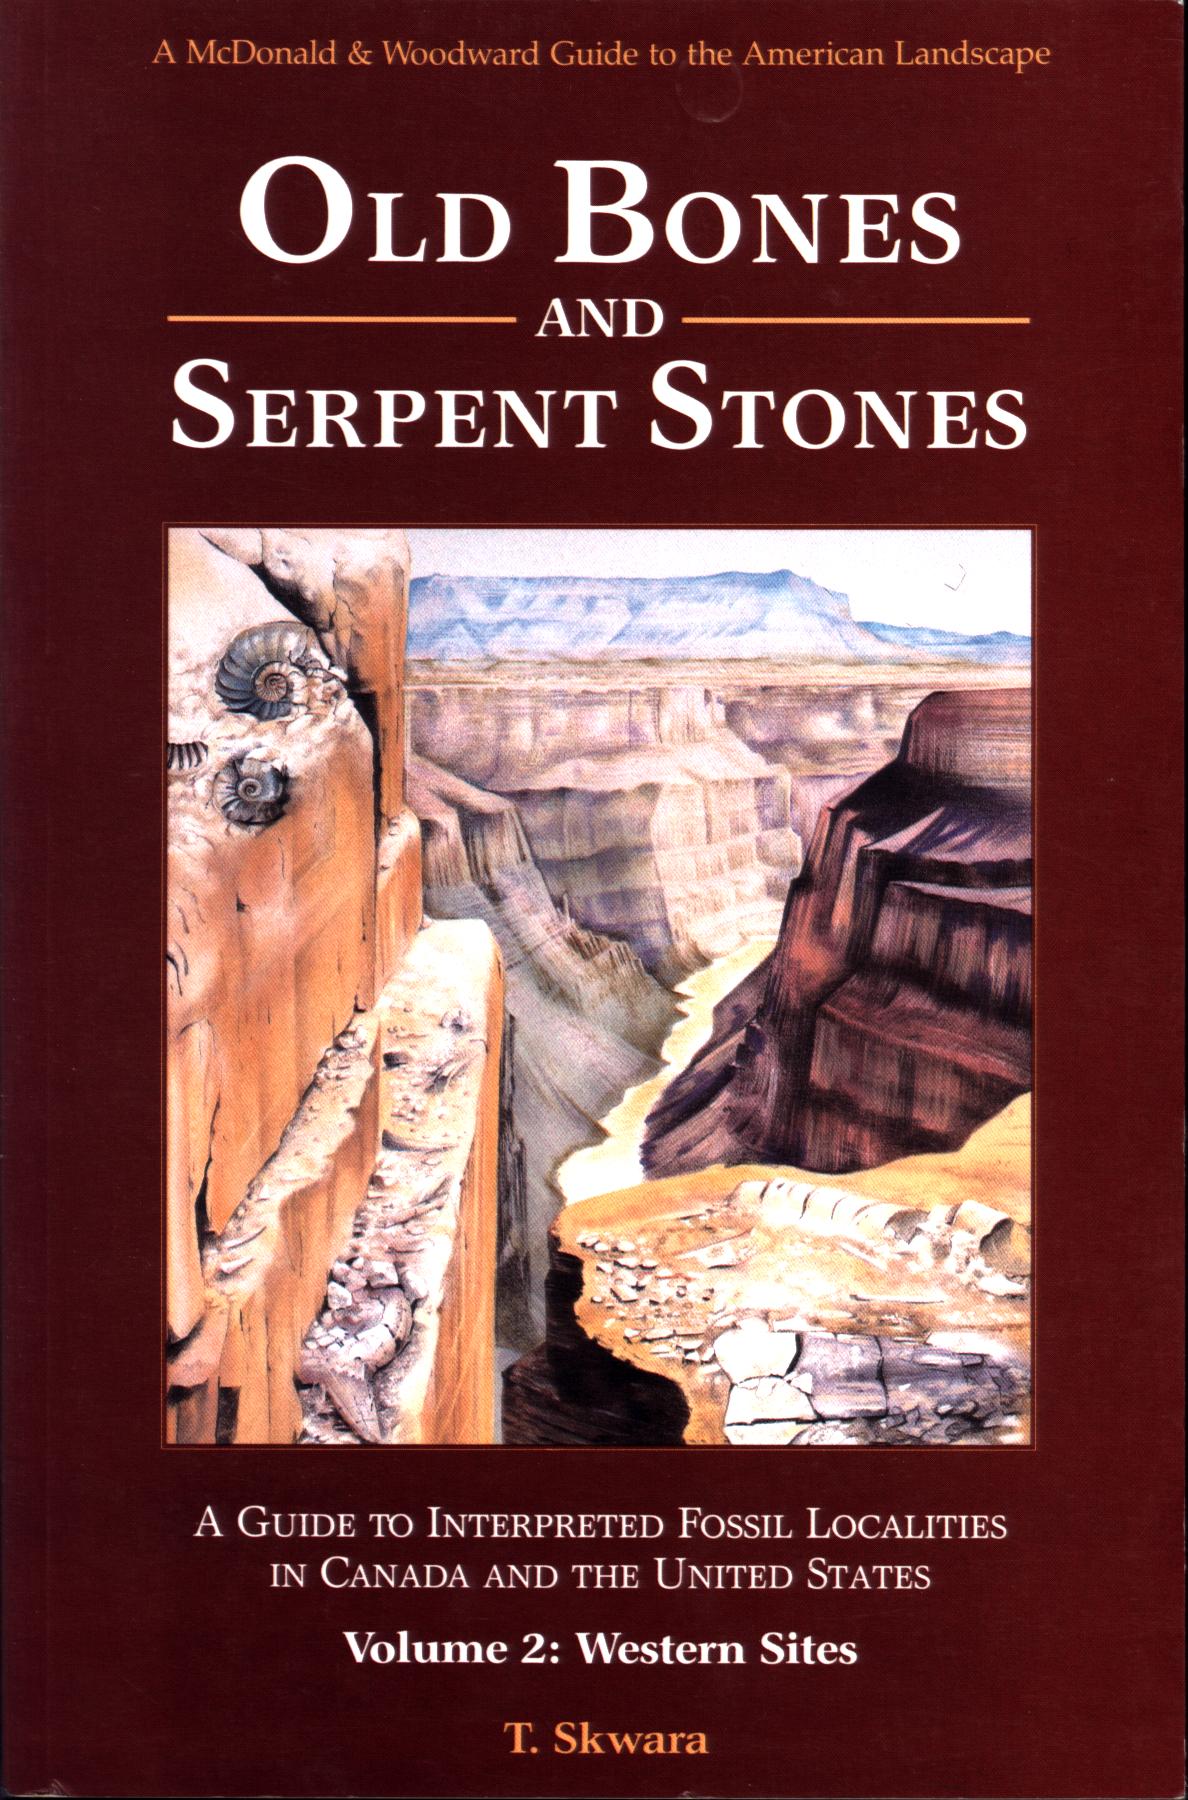 OLD BONES AND SERPENT STONES: a guide to interpreted fossil localities in Canada and the Western United States--Volume 2: western sites.